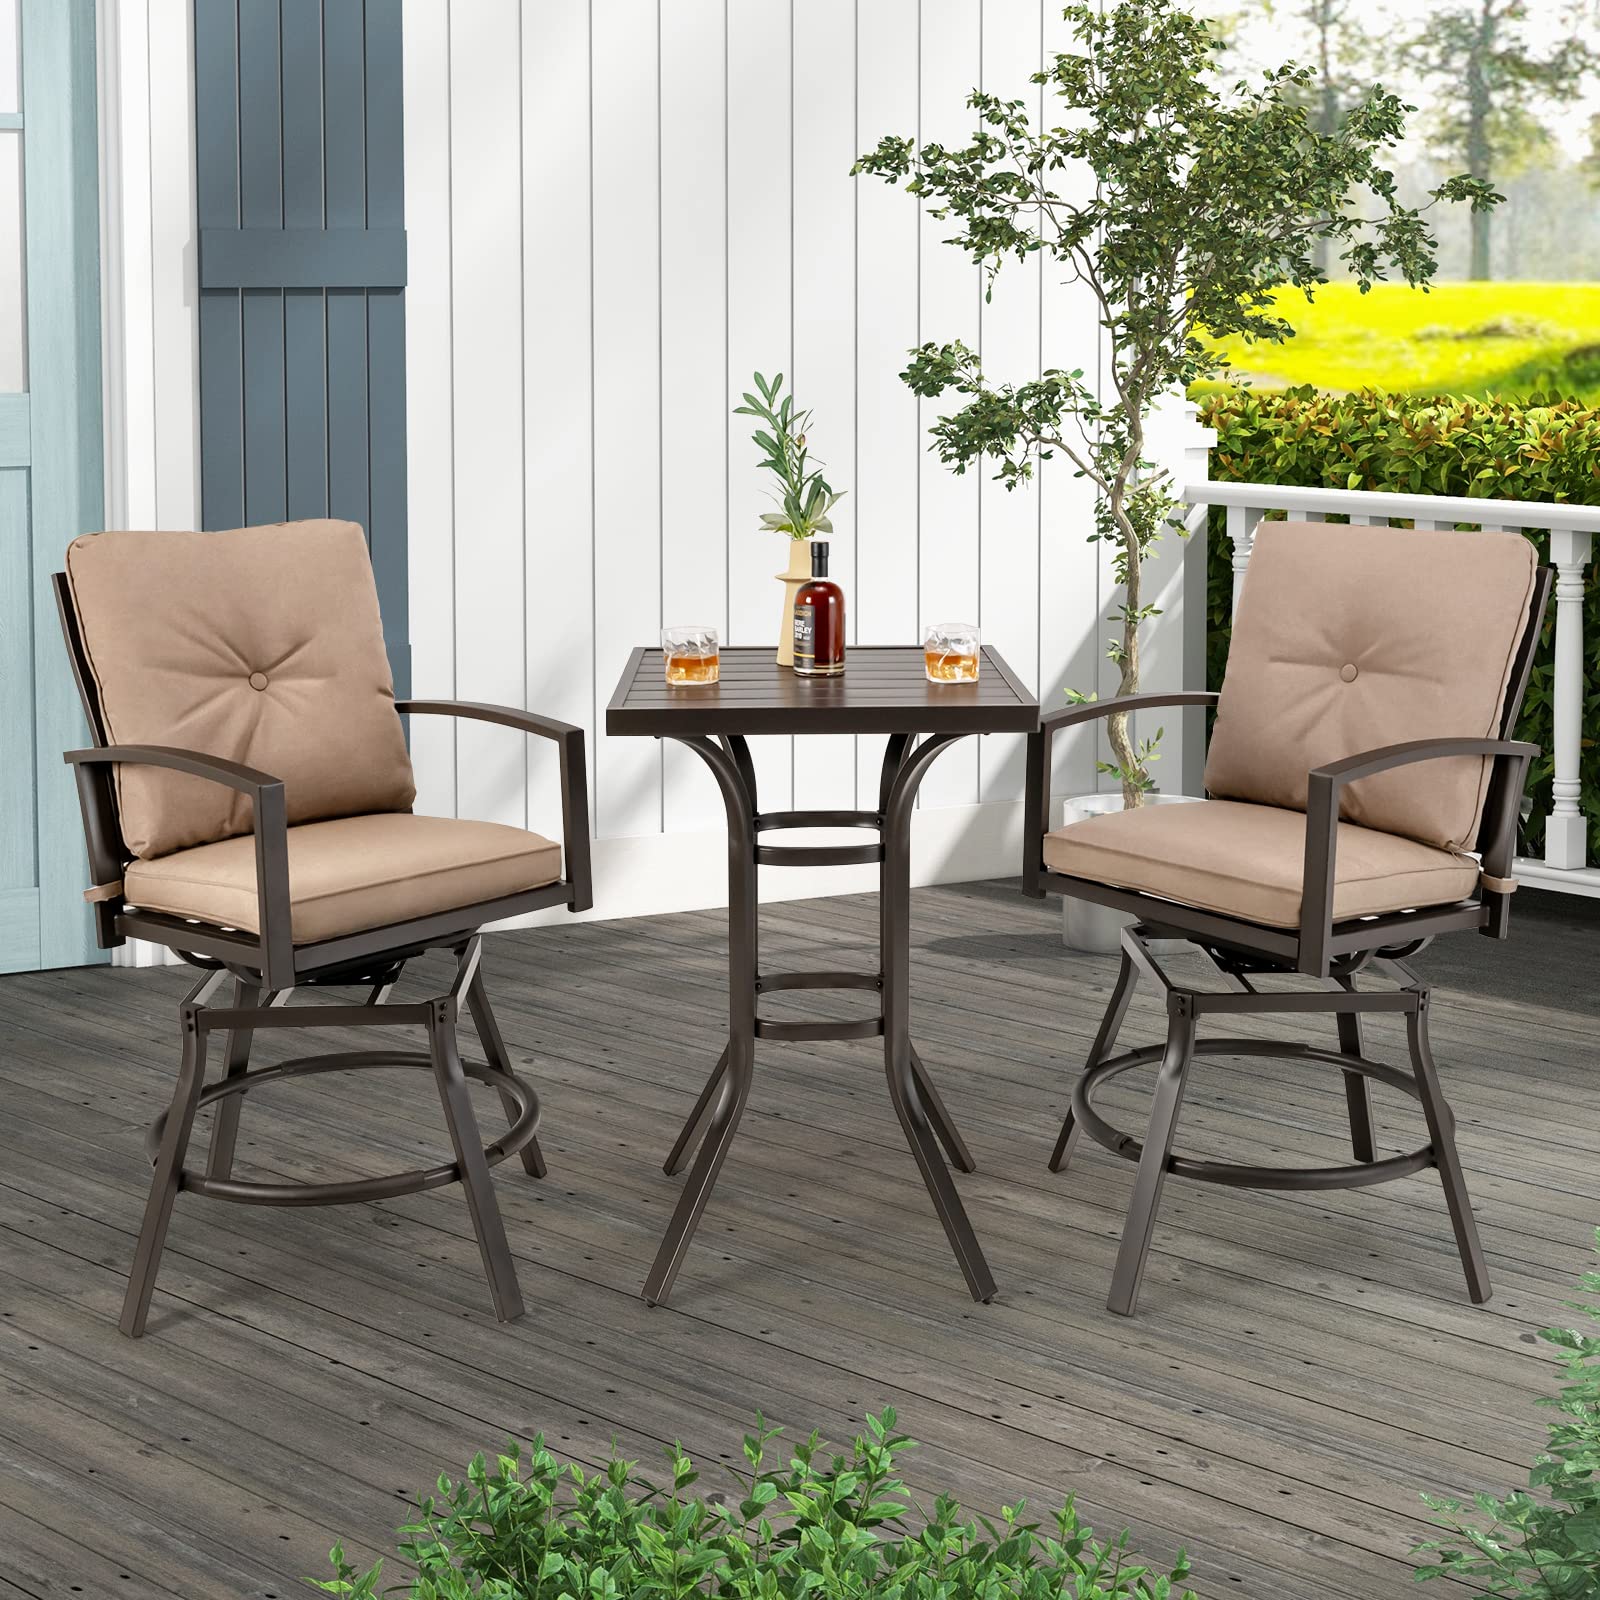 Giantex Set of 2 or 4 Patio Bar Chairs - Swivel Counter Height Bar Stool with Inclined Backrest